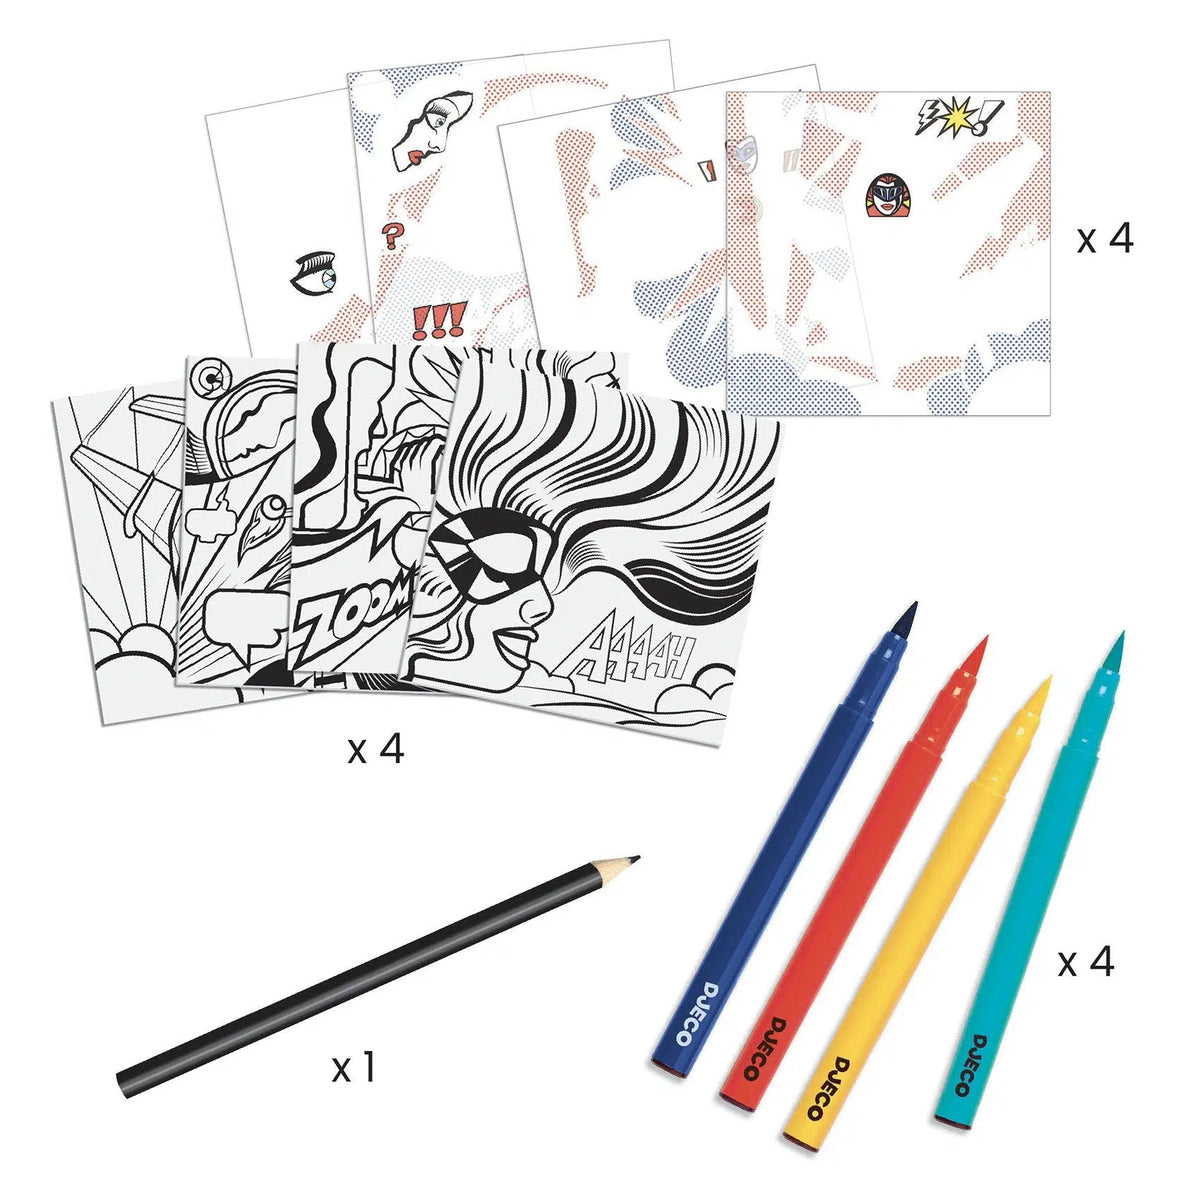 Front view of the contents included with the Superheroes Inspired by Lichtenstein Coloring and Rub-On Transfer Kit.